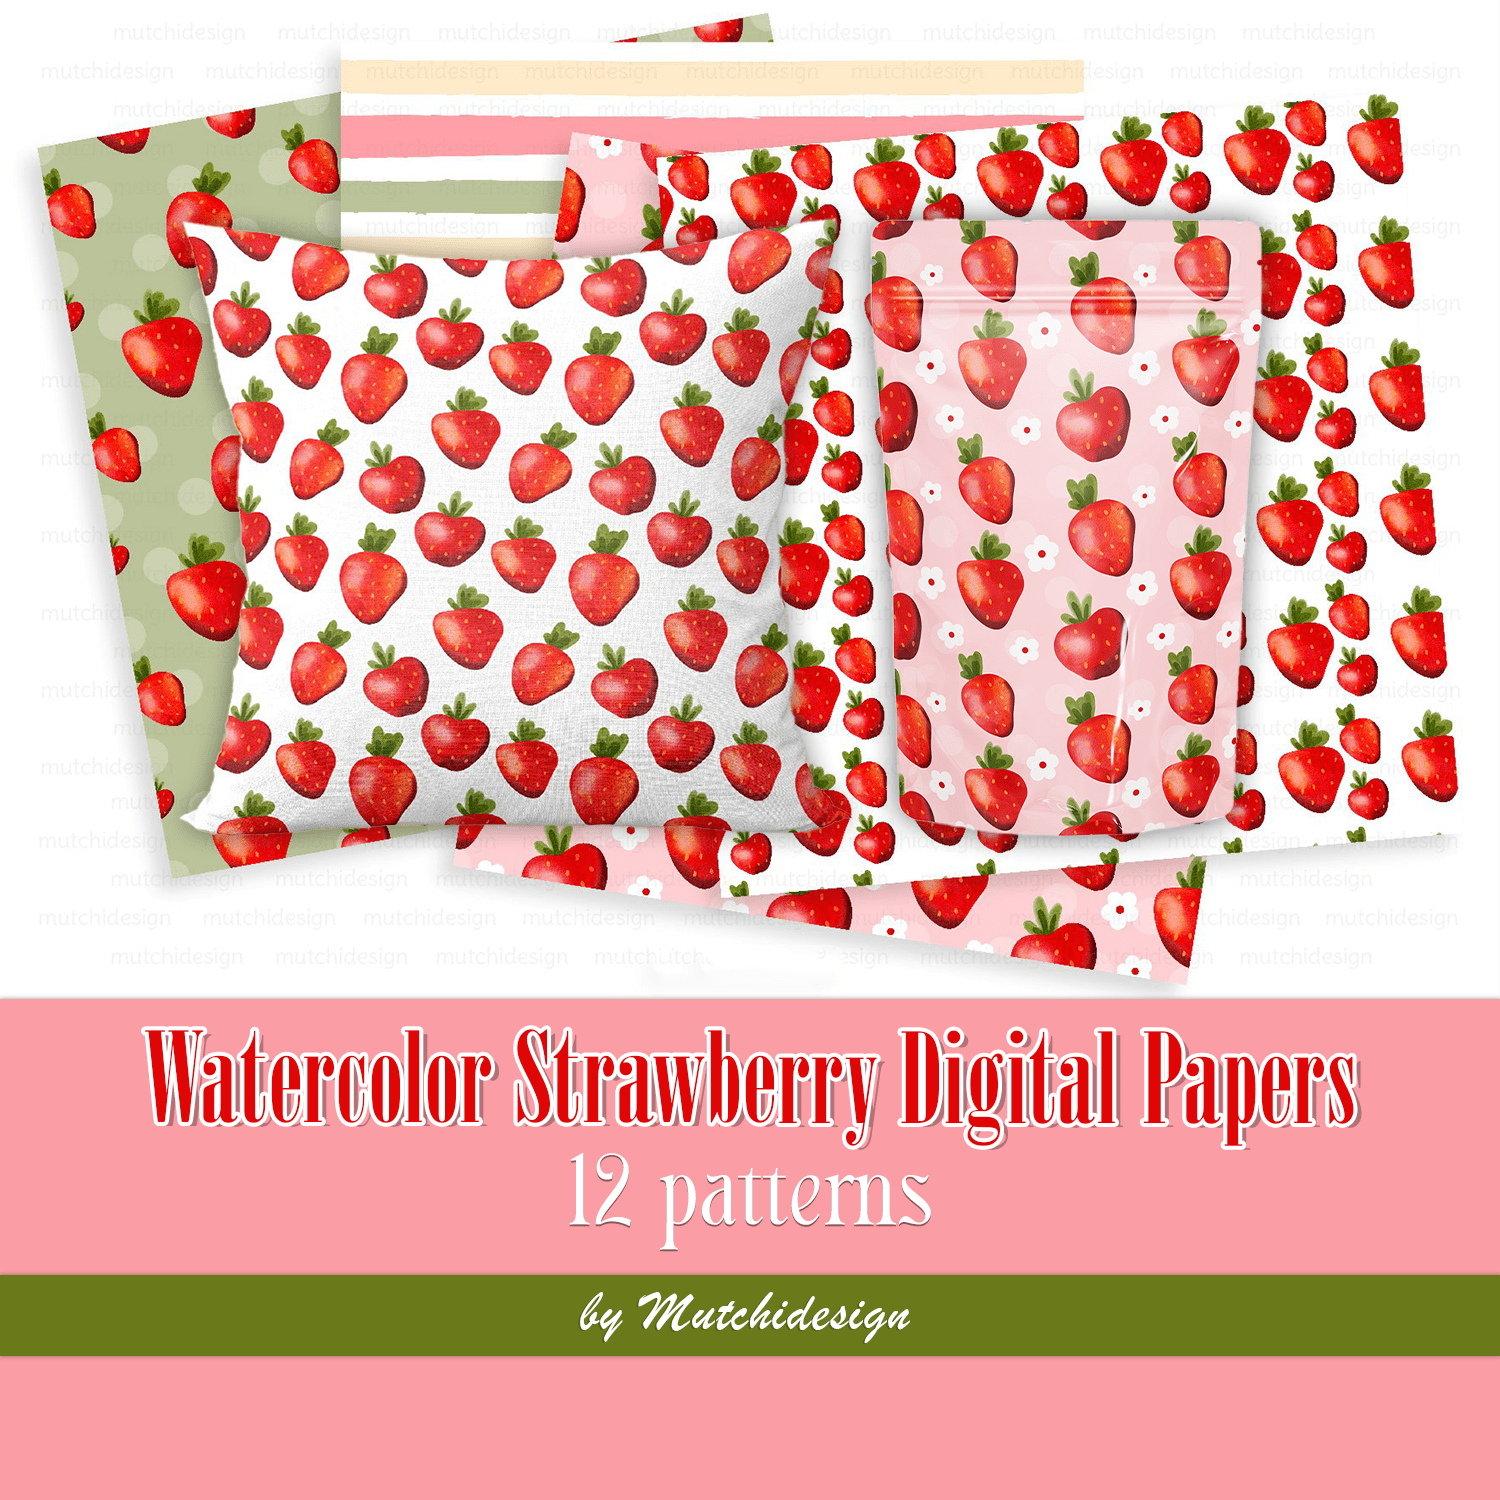 Watercolor Strawberry Digital Papers Created By Mutchidesign.